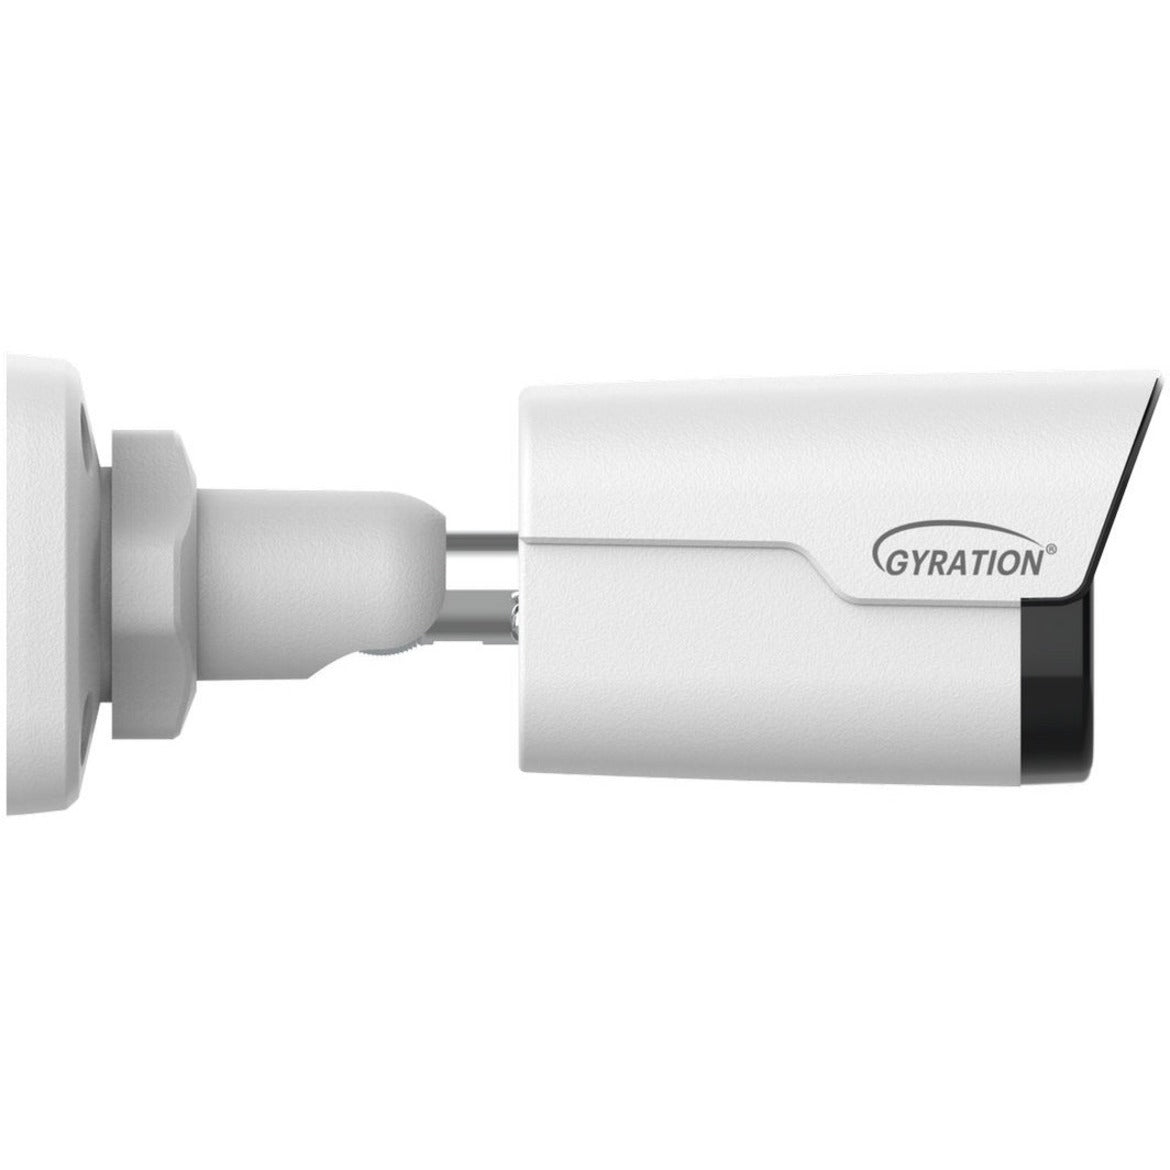 Gyration CYBERVIEW 410B-TAA 4 MP Outdoor Intelligent Fixed Bullet Camera, 2688 x 1520 Resolution, Infrared Night Vision, IP67 Rated